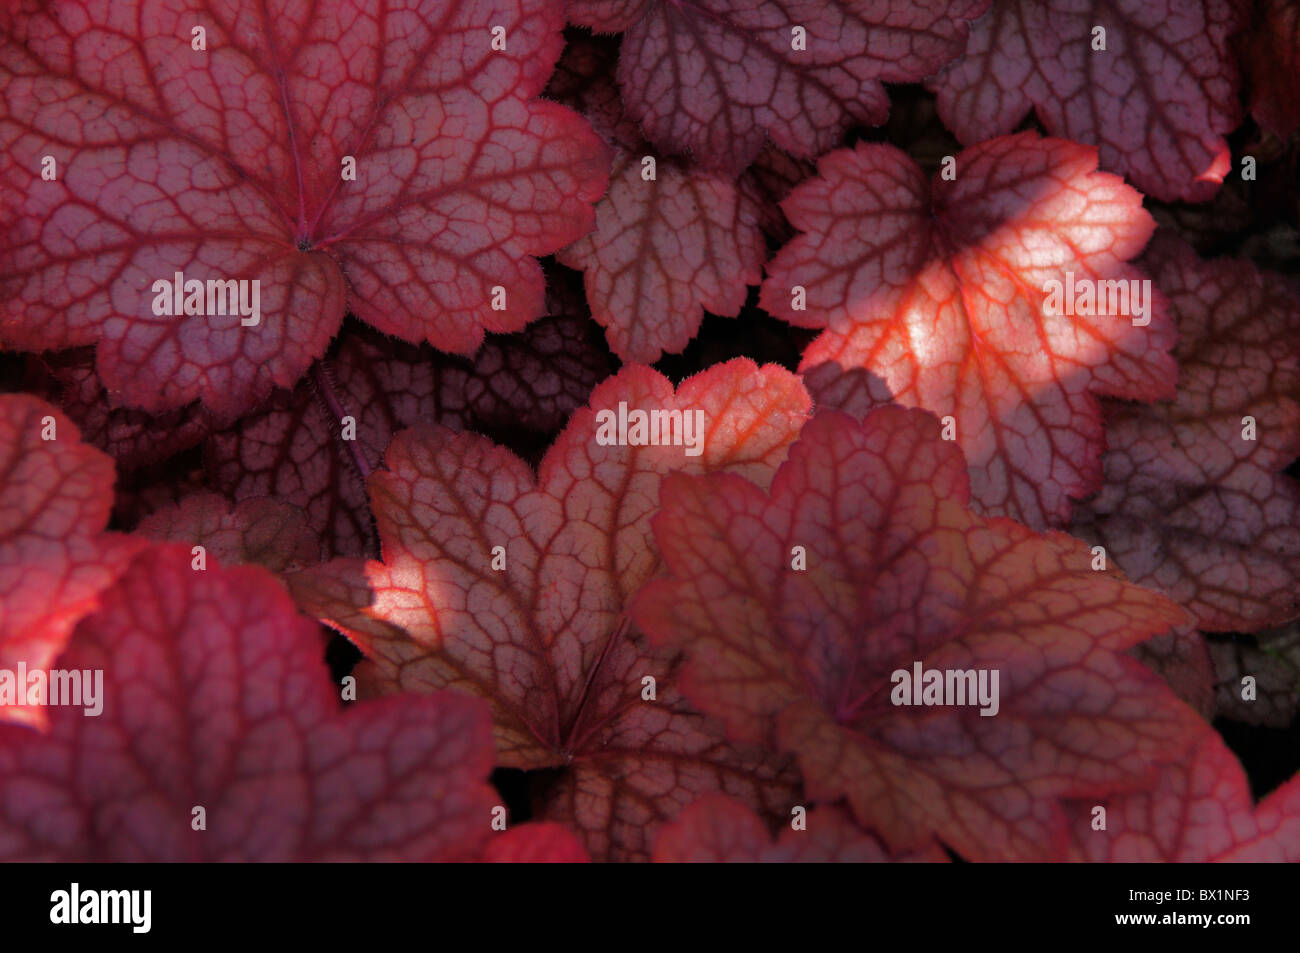 A Heuchera plant wit's broad leaves growing in a garden. Stock Photo